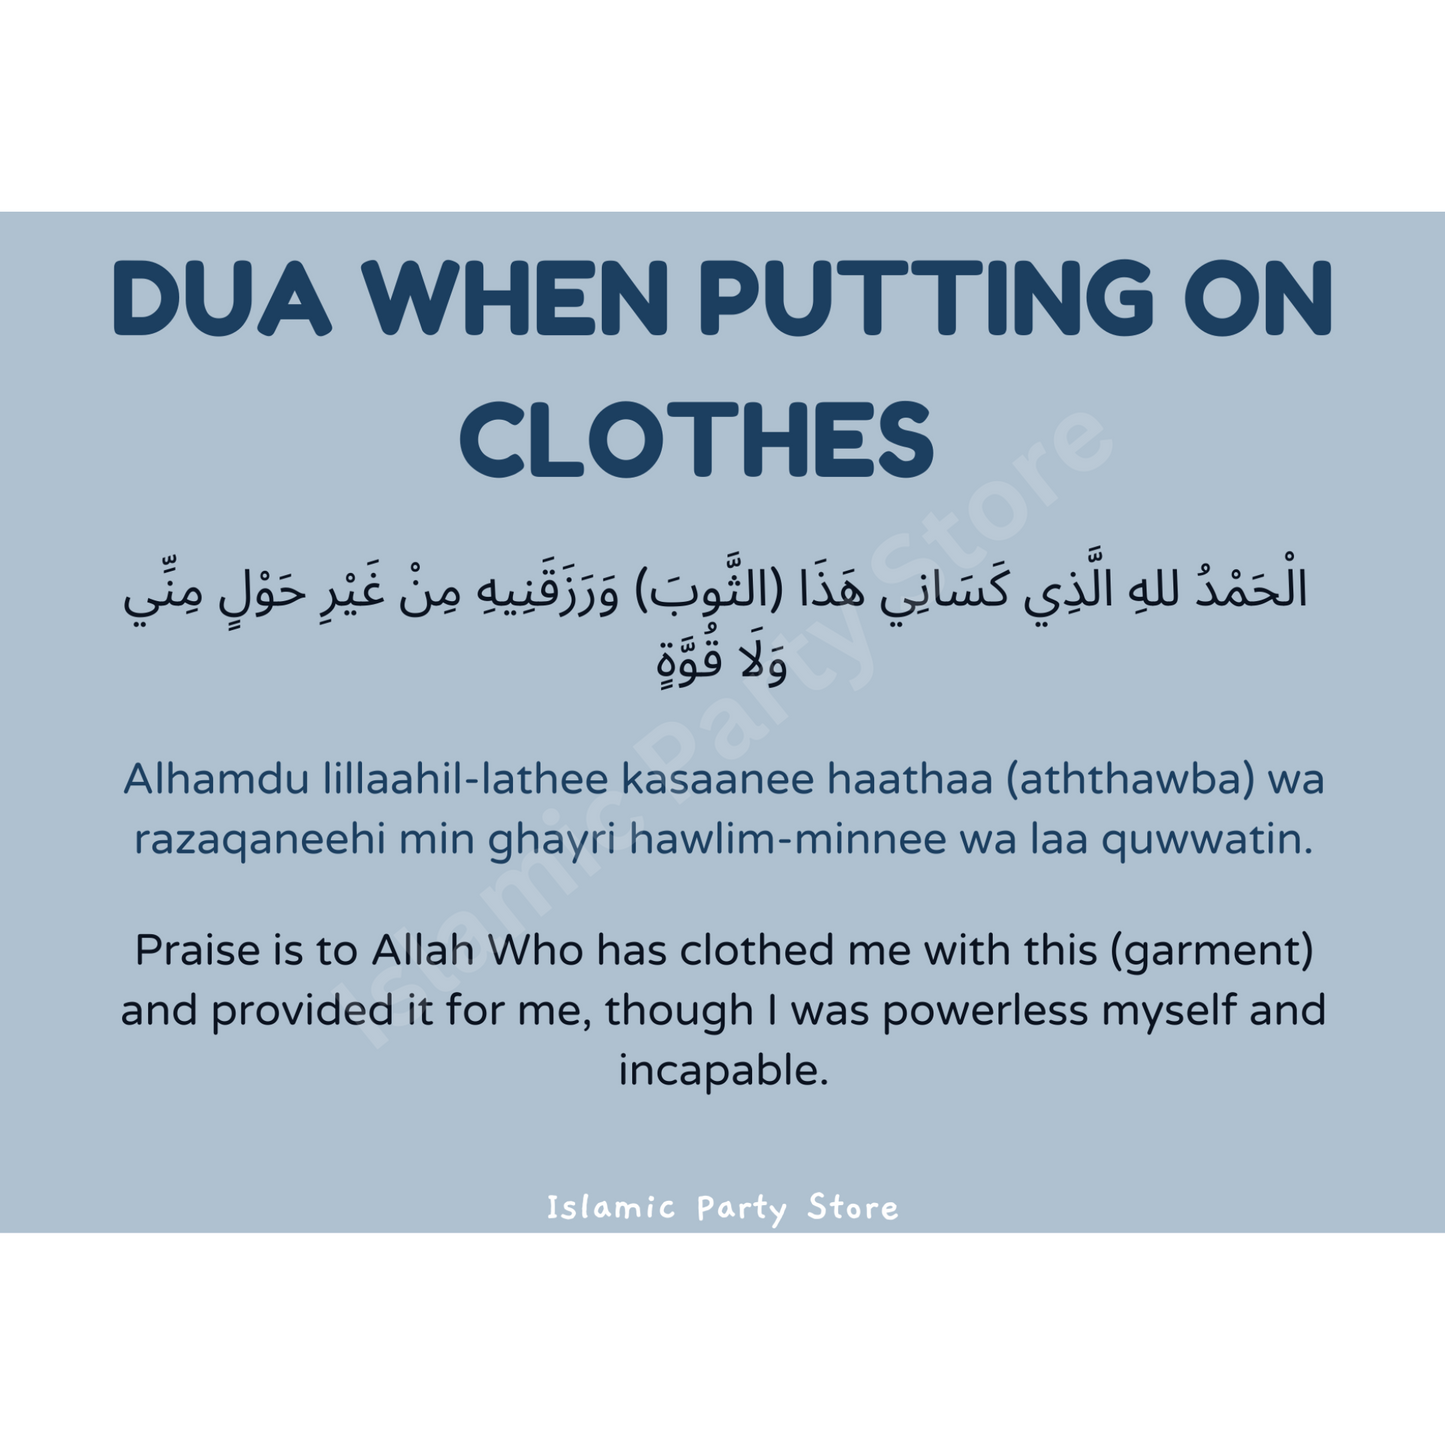 Putting on clothes dua